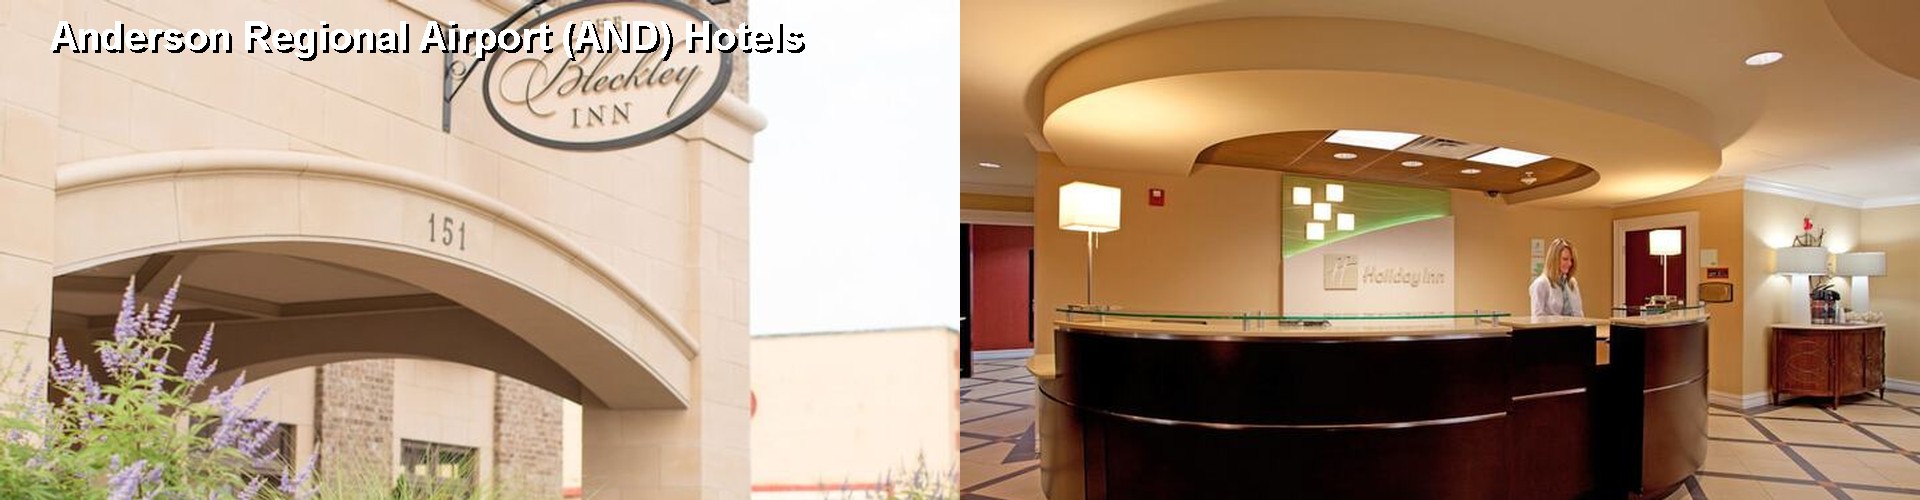 4 Best Hotels near Anderson Regional Airport (AND)